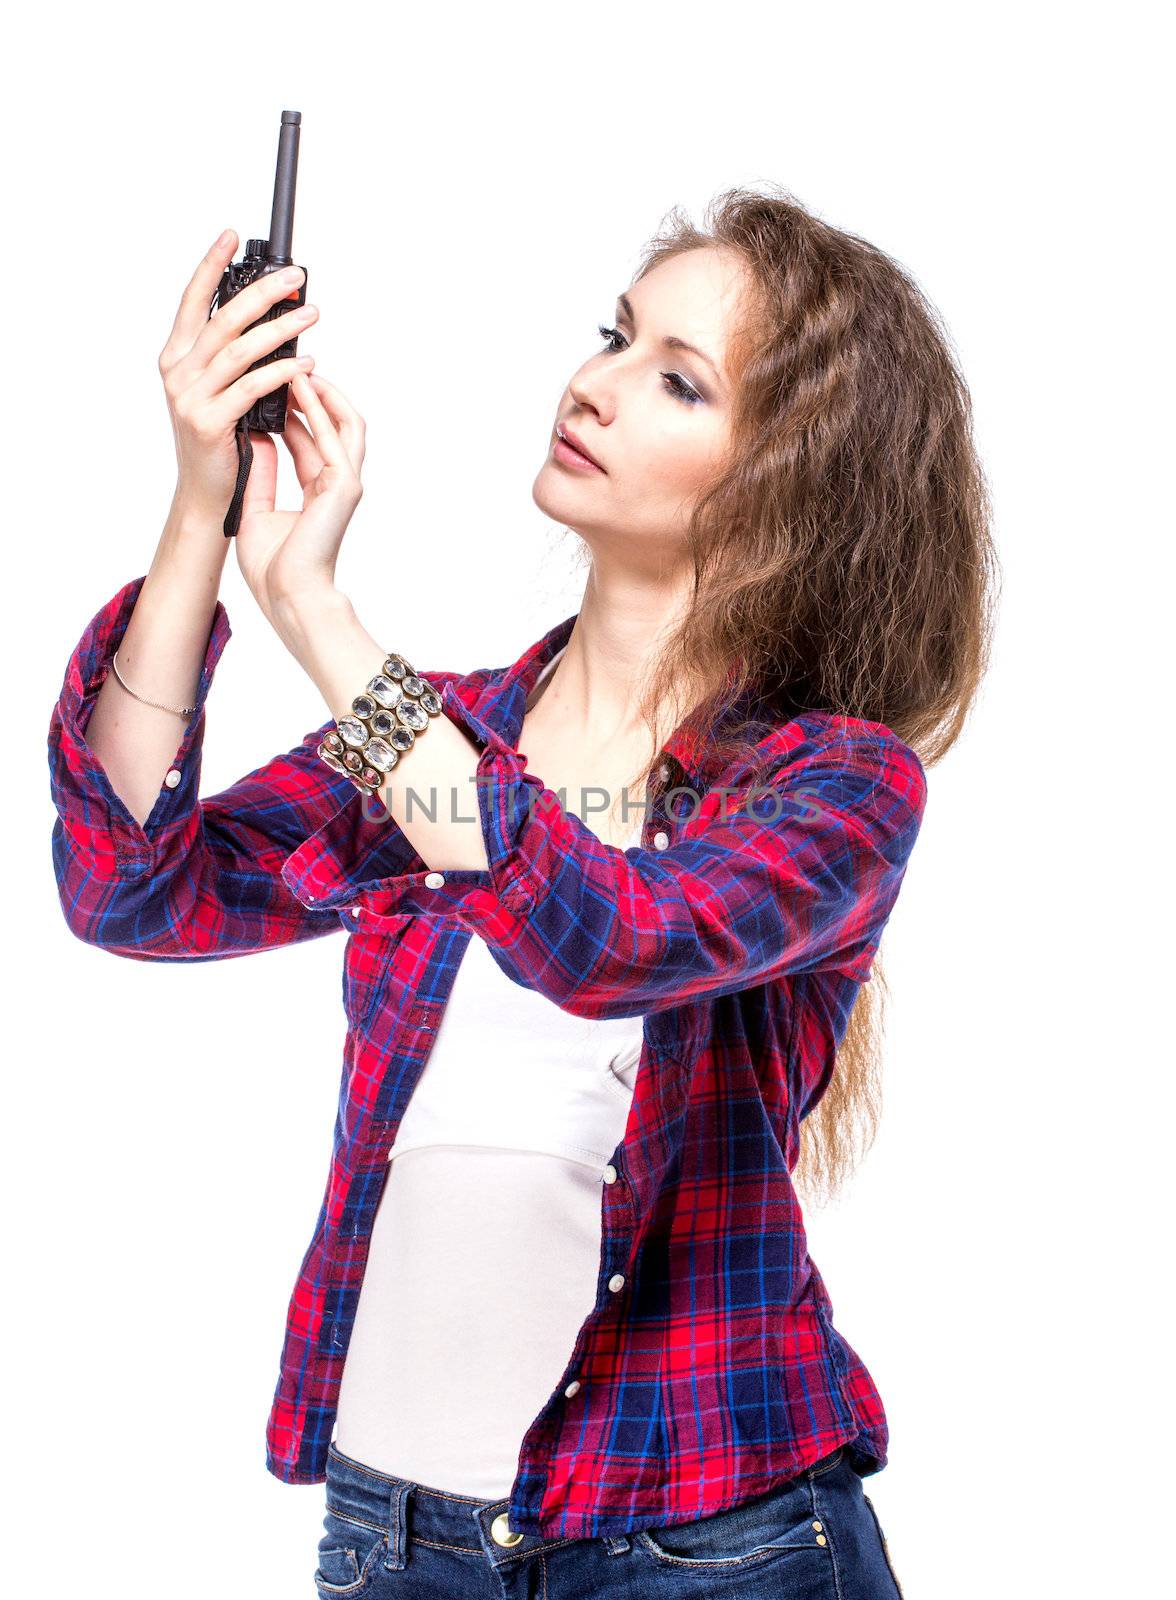 Attractive young woman in a checkered shirt with walkie talkie, by gsdonlin